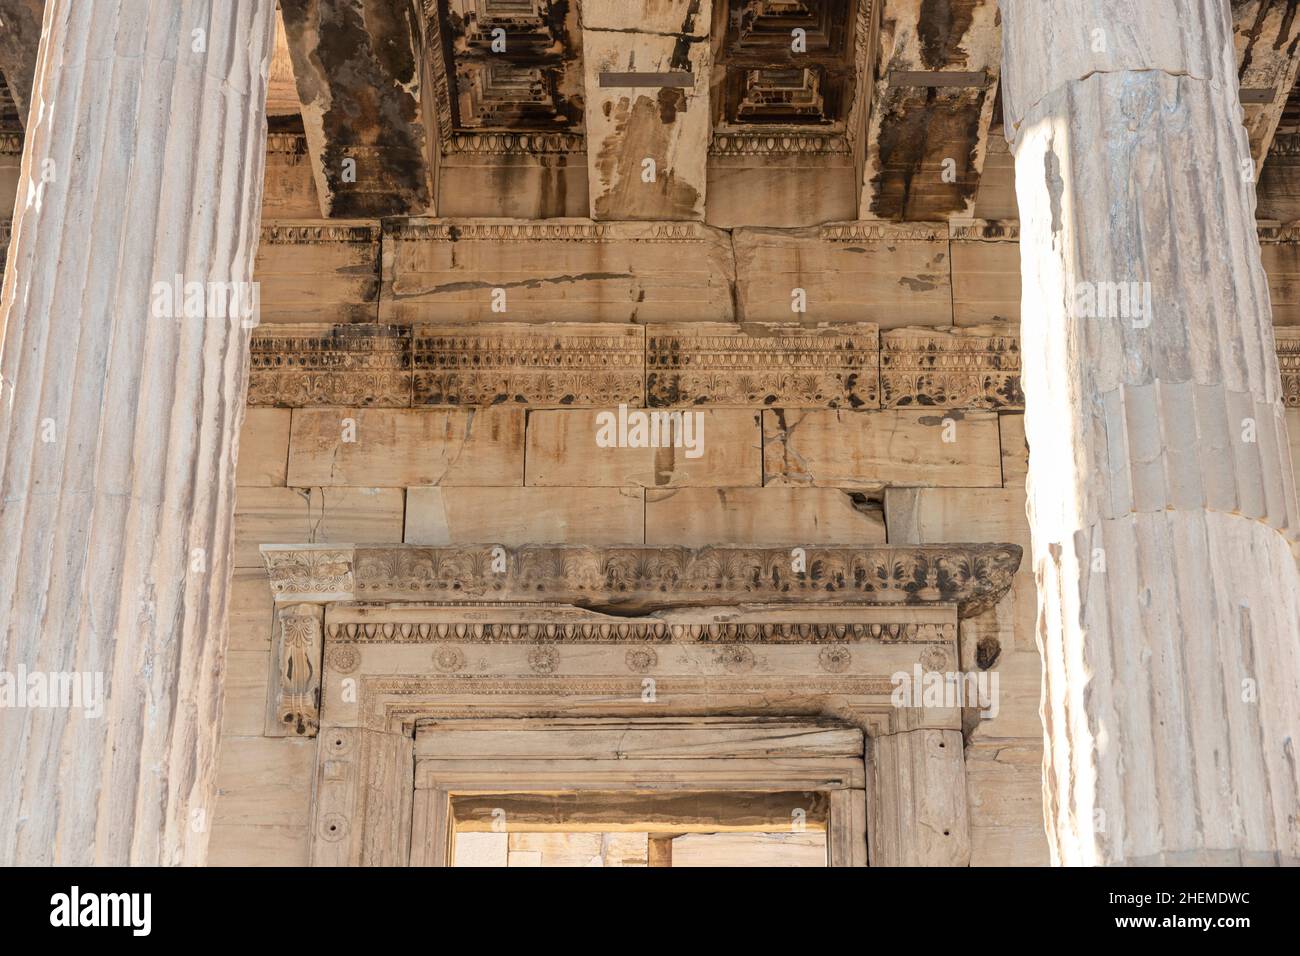 Athens, Greece. The Erechtheion, or Temple of Athena Polias, an ancient Greek Ionic temple-telesterion on the north side of the Acropolis Stock Photo